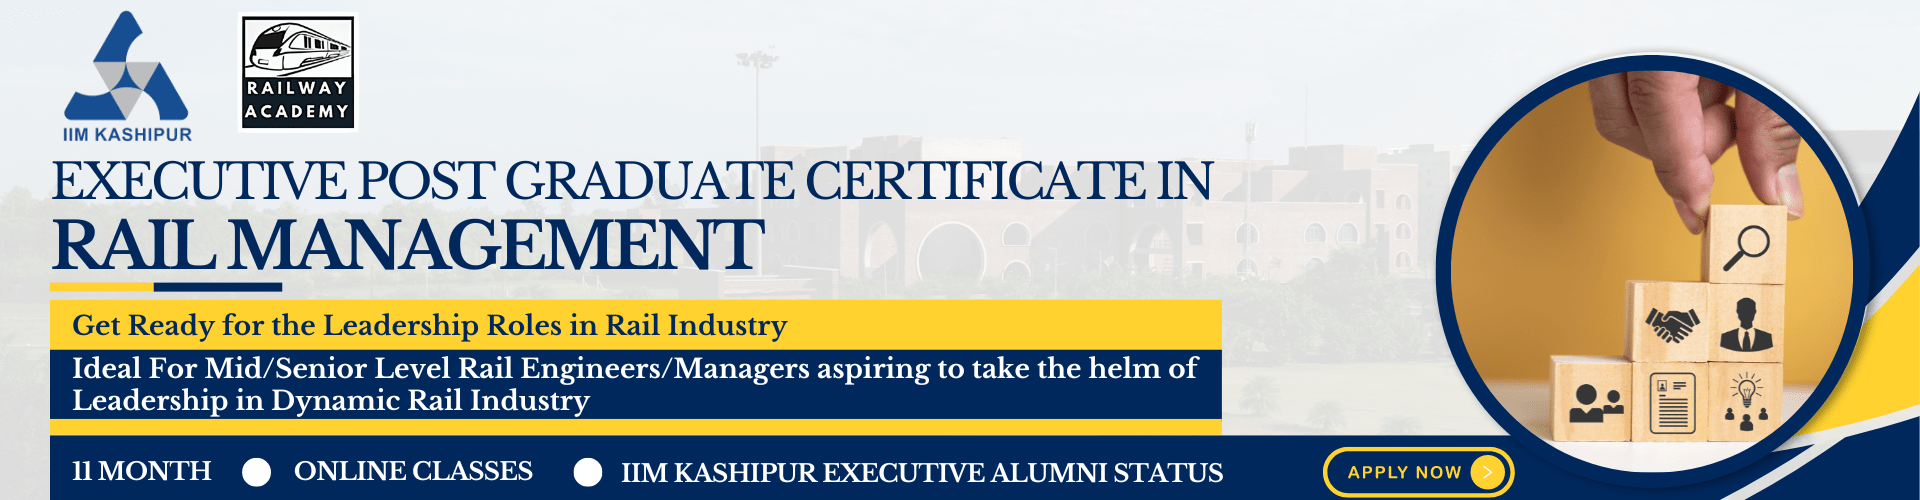 Executive Post Graduate Certificate in Rail Management, in association with Railway Academy